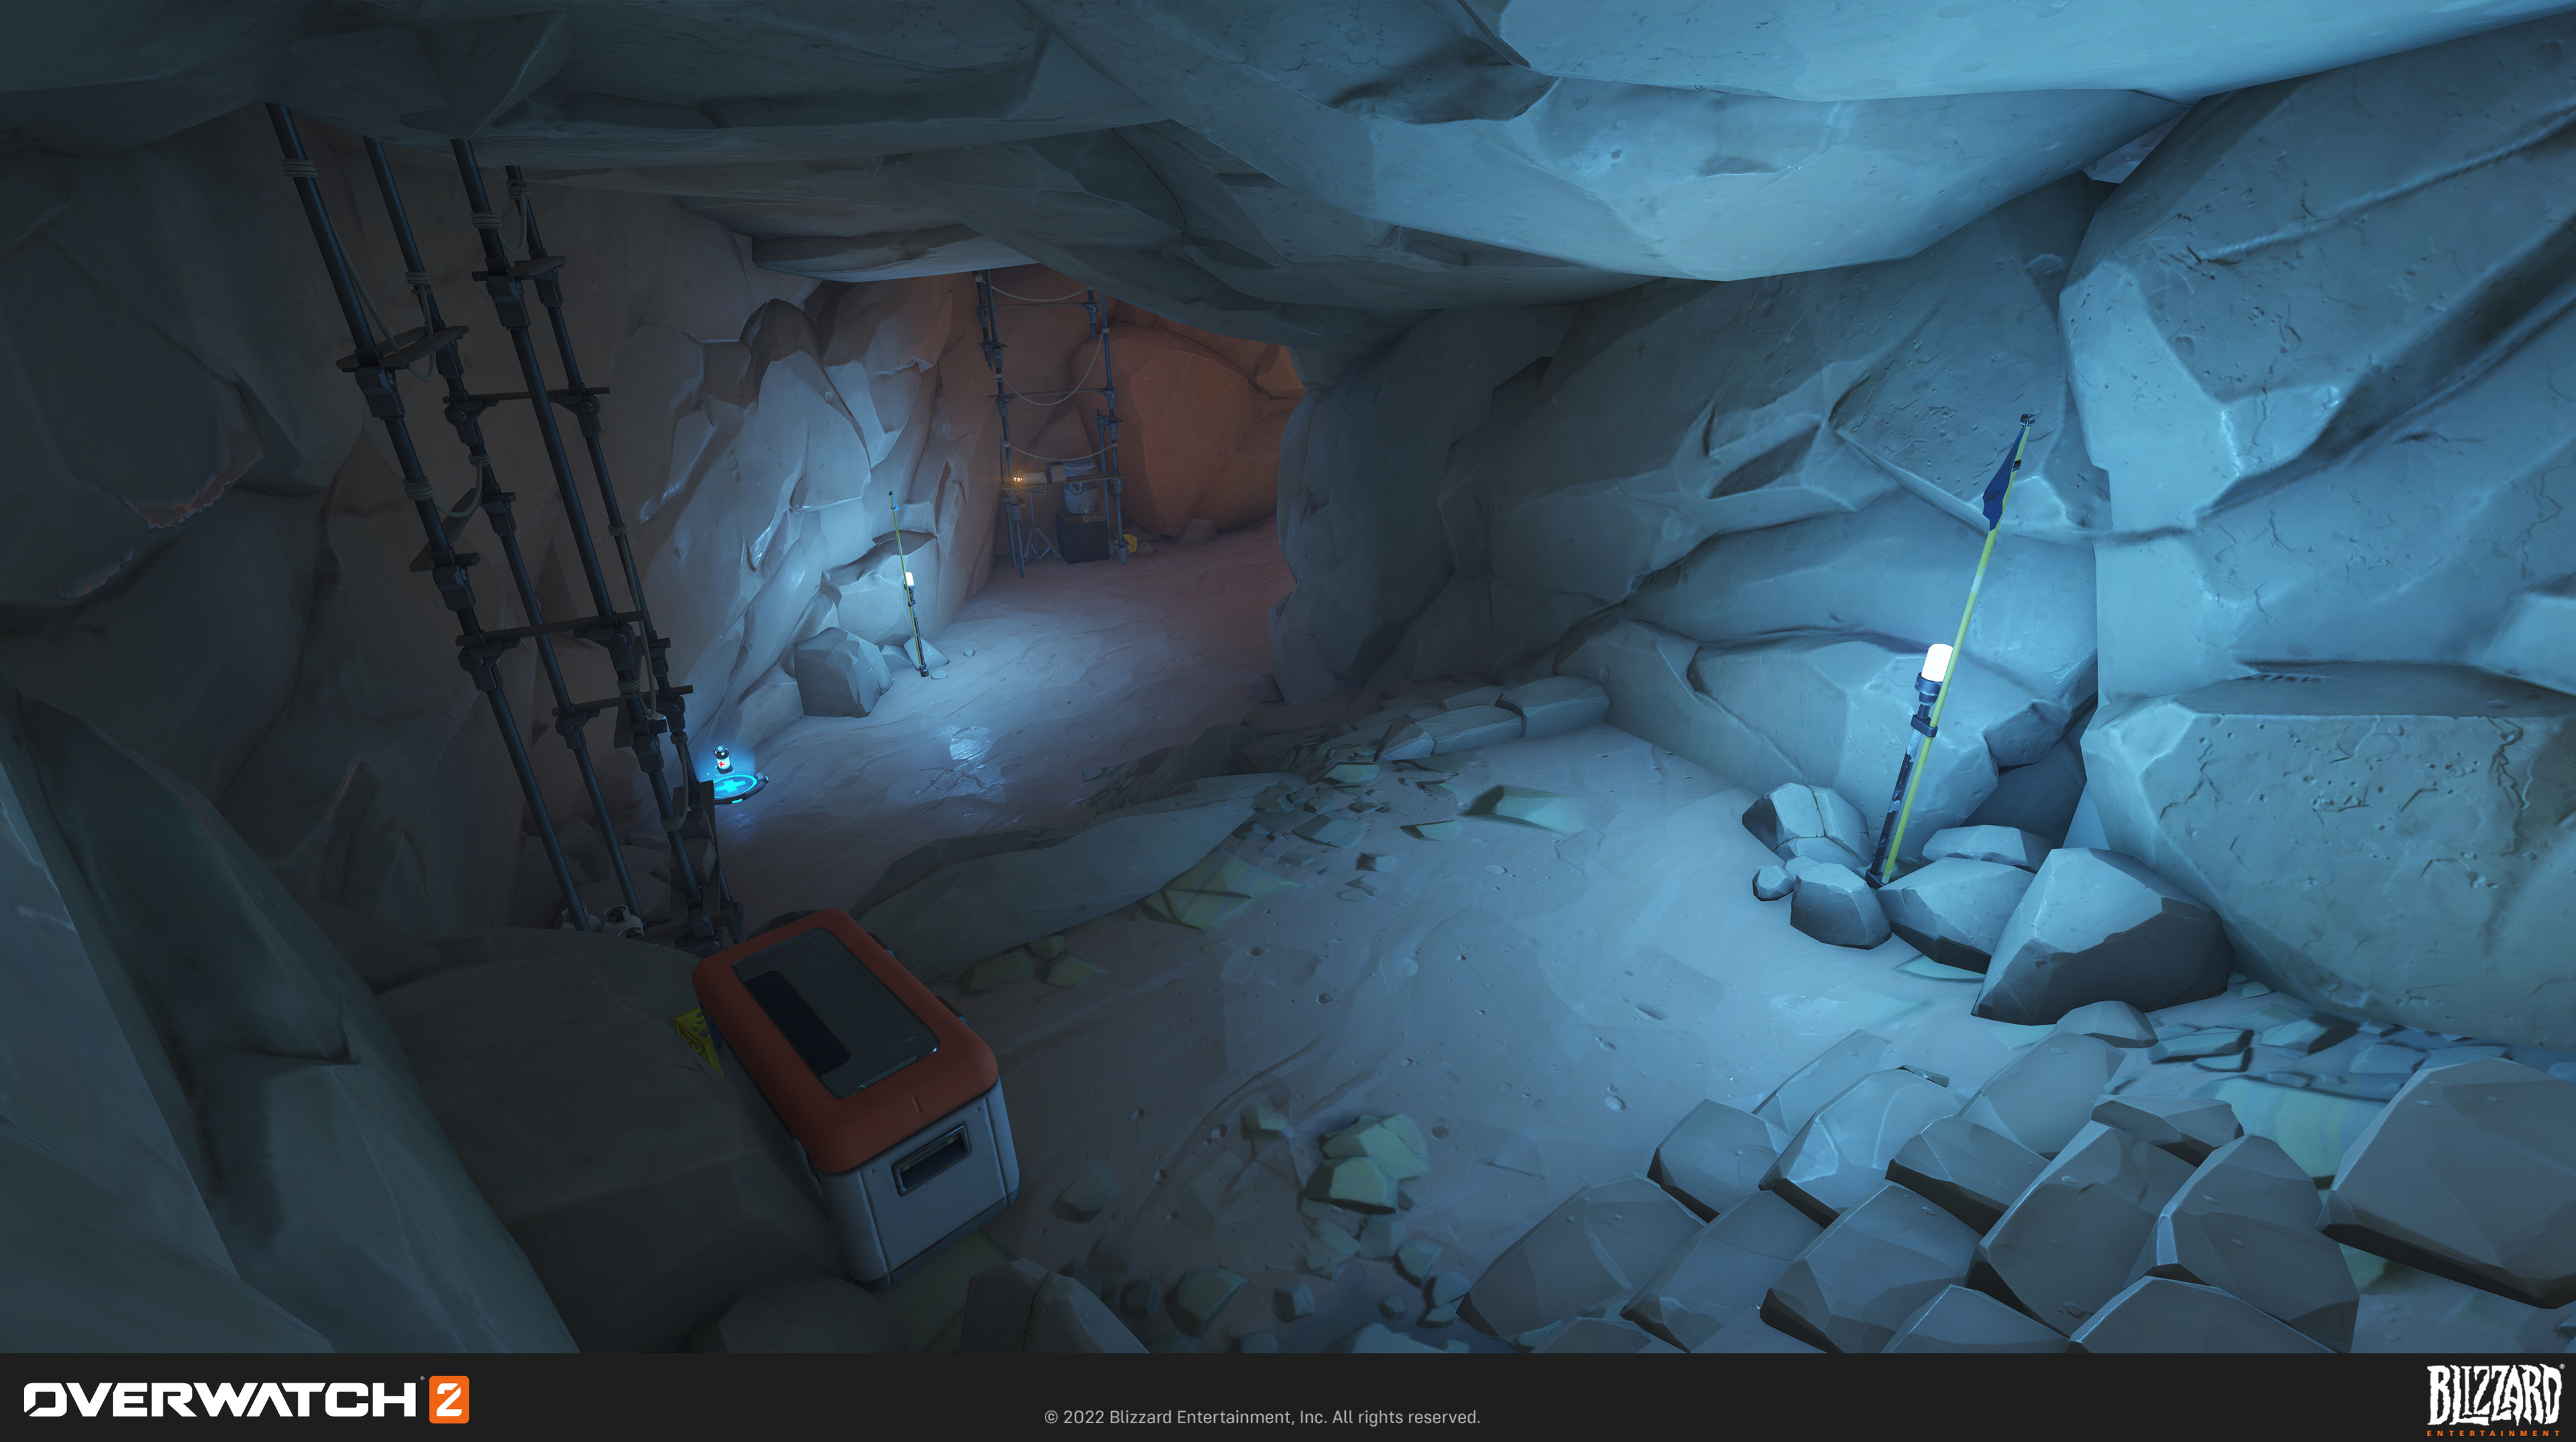 Added scale elements around the cave system to reinforce a sense of human abandonment (digging/mining operation).